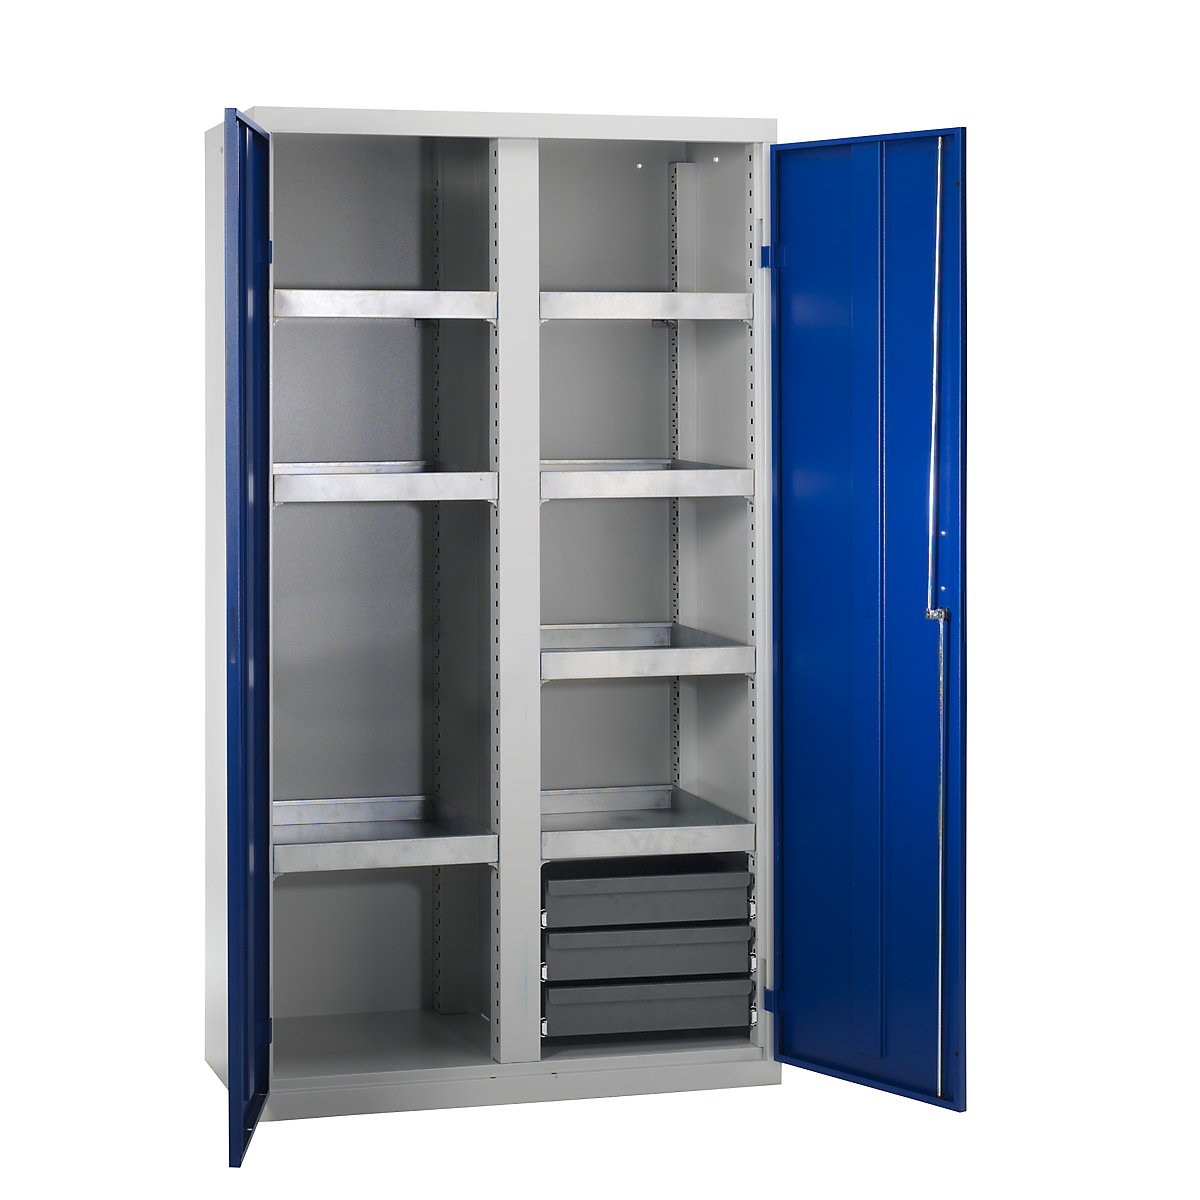 Environmental cupboard without door perforations, HxWxD 1800 x 1000 x 500 mm, 7 tray shelves, light grey / gentian blue-4